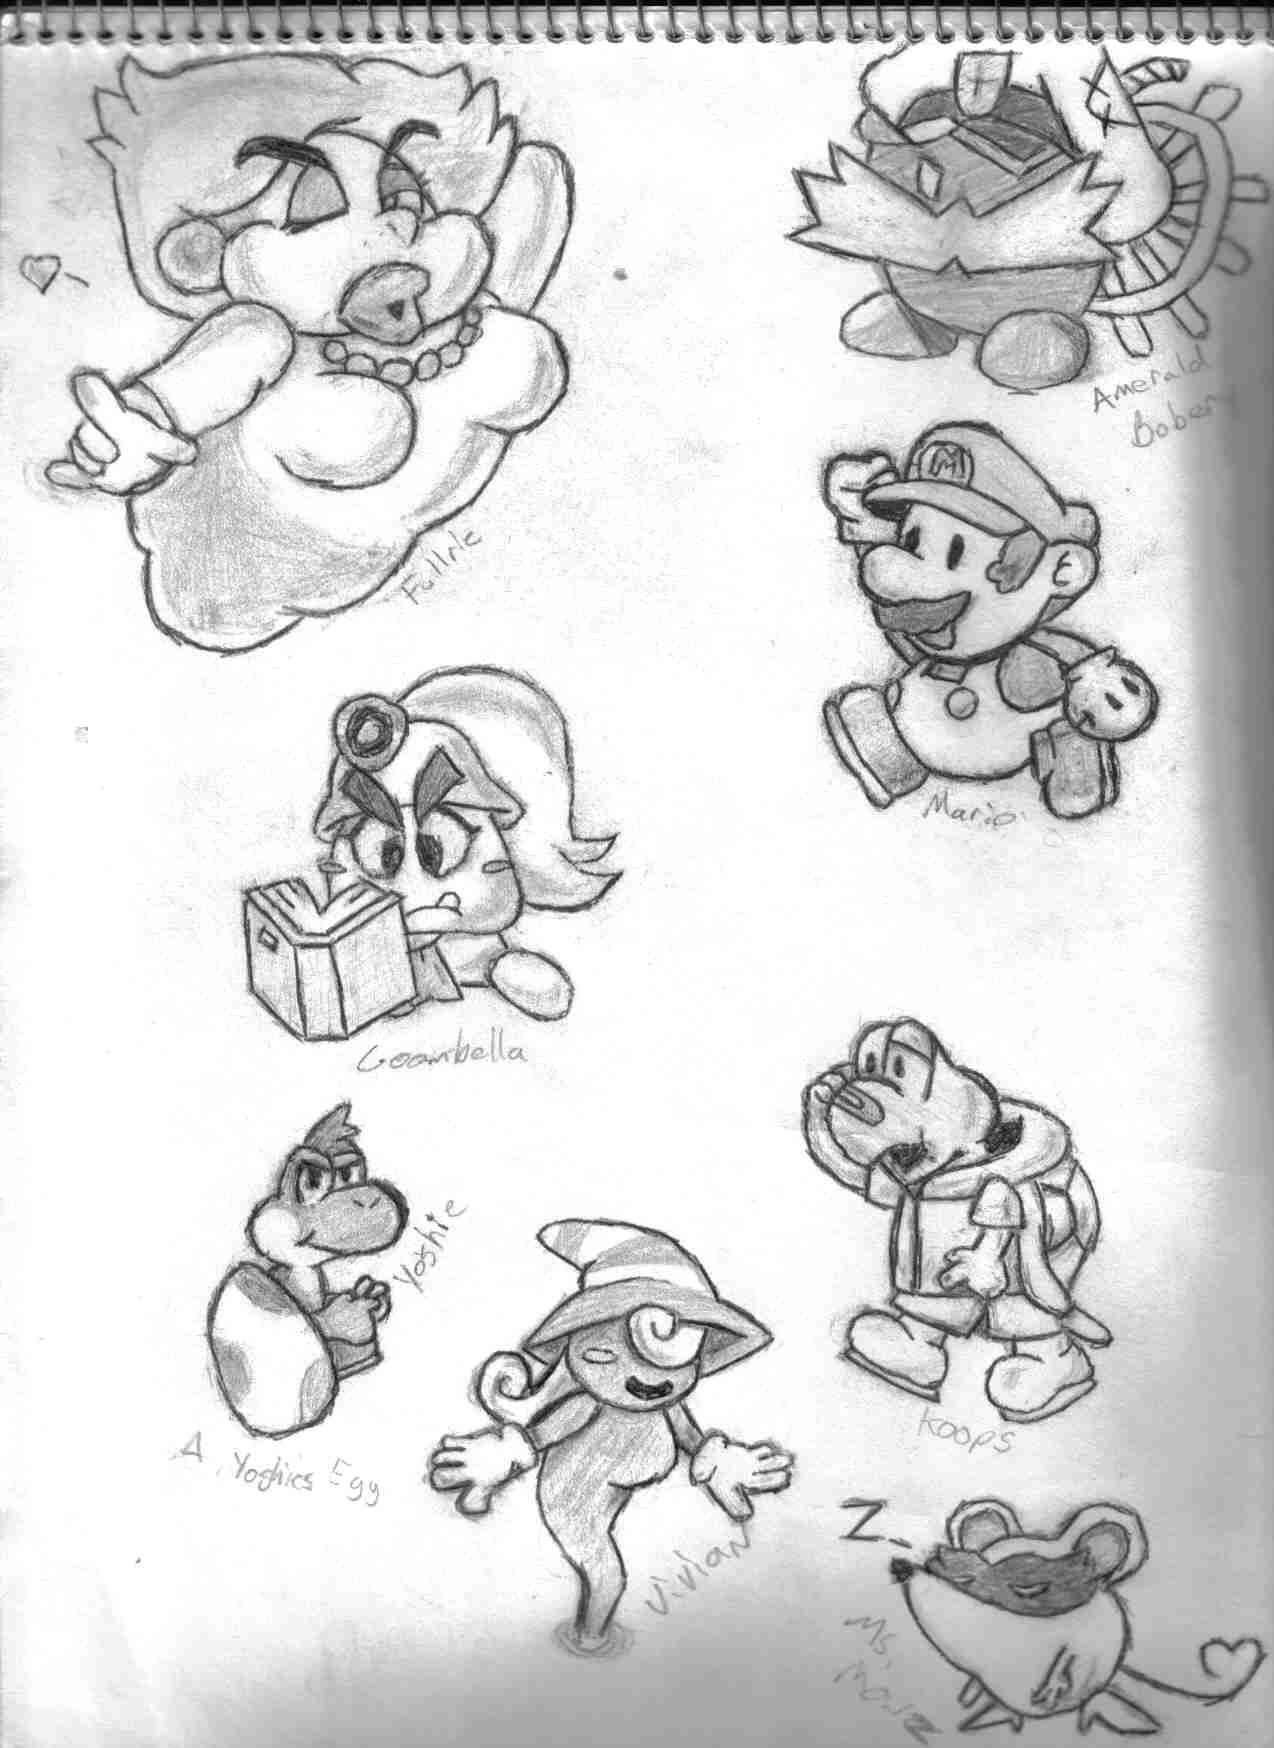 Mario with his partners by LionTamer